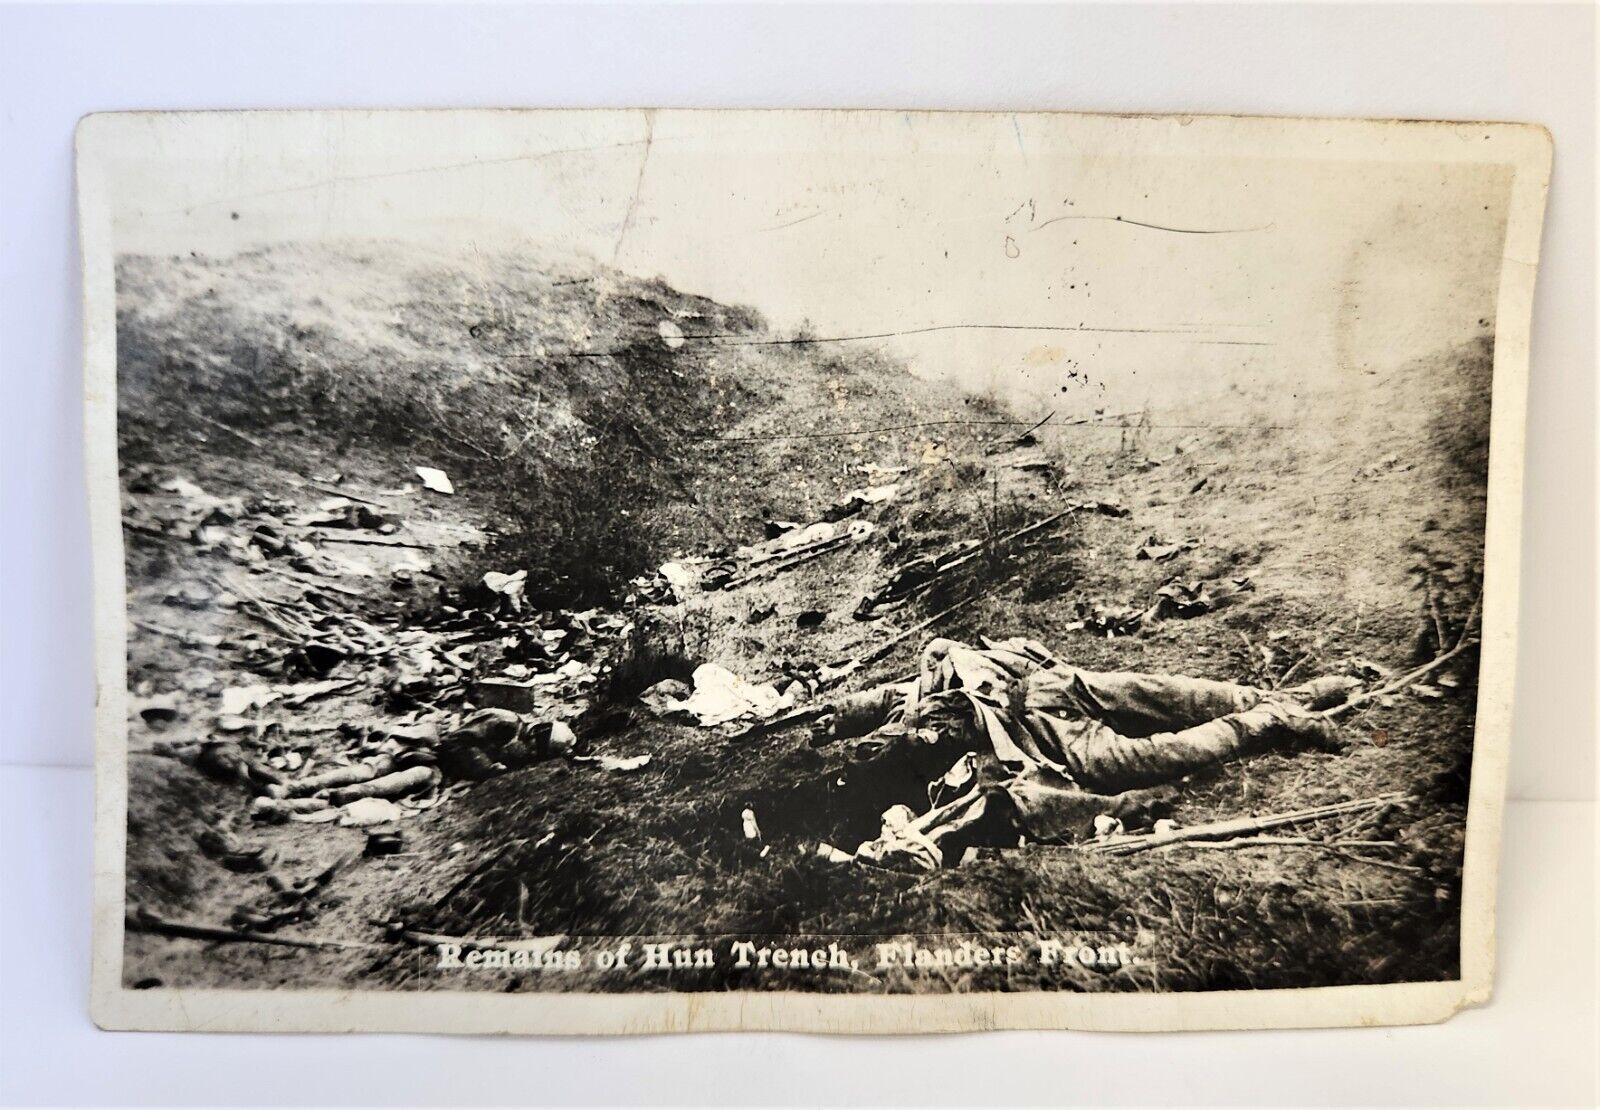 WWI Belgium Germany Postcard Remains Of Hun Trench Flanders Front Antique